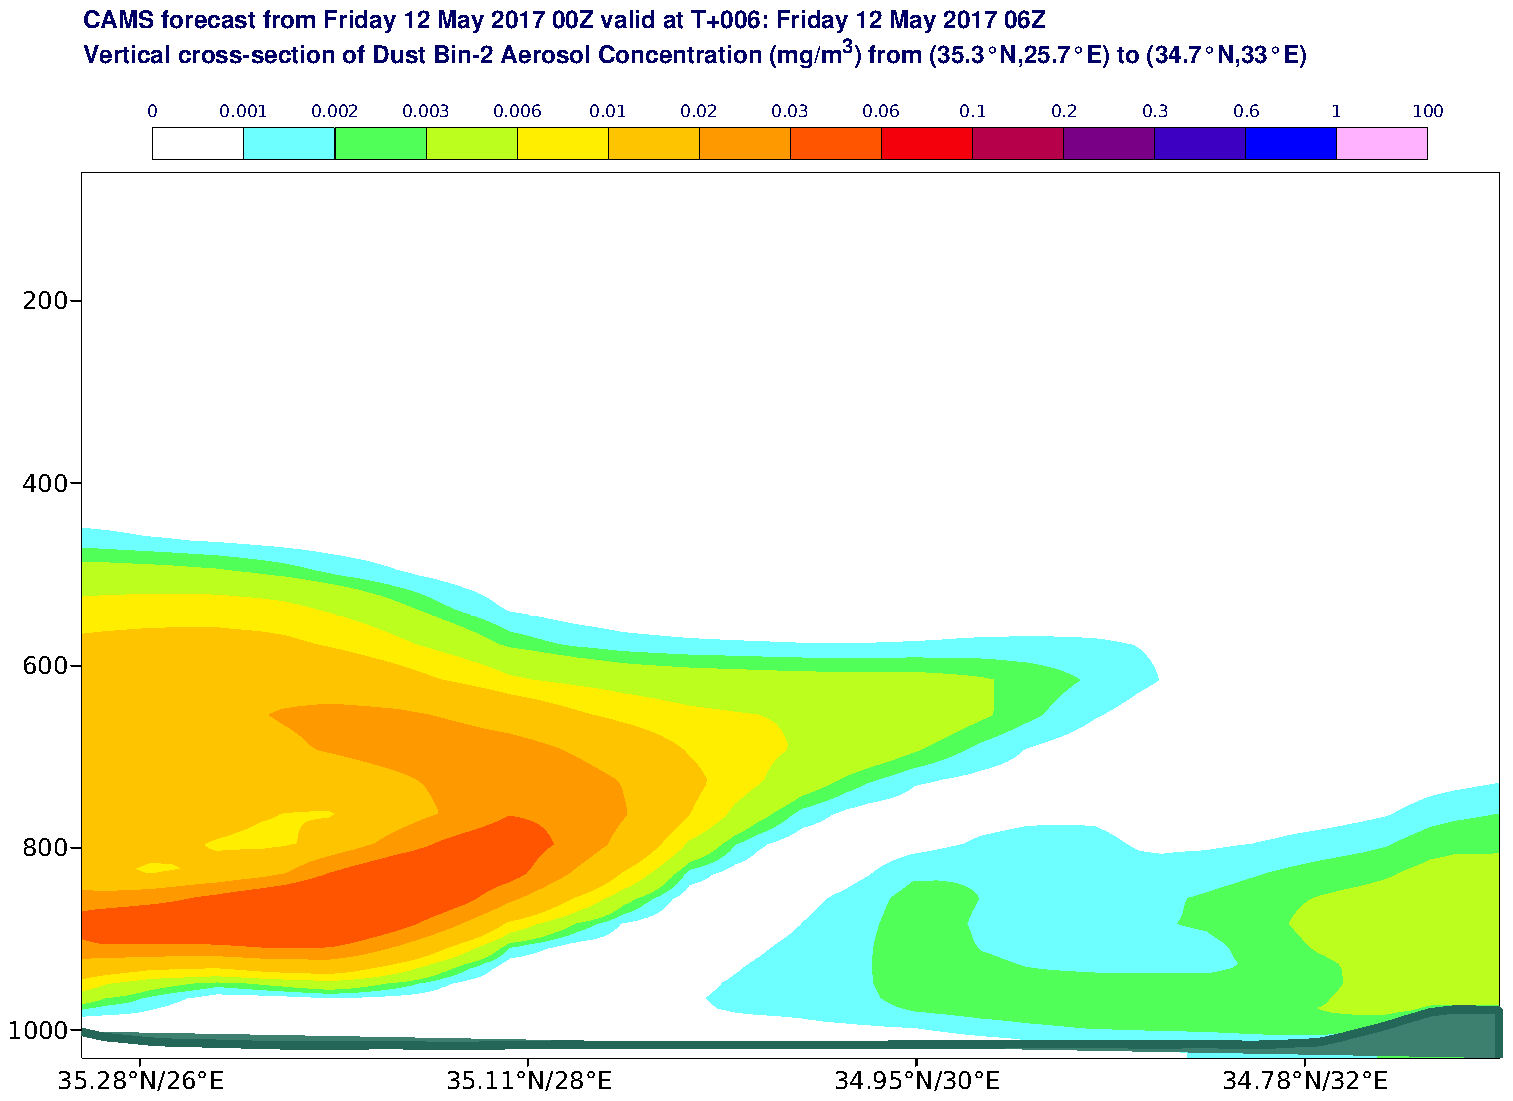 Vertical cross-section of Dust Bin-2 Aerosol Concentration (mg/m3) valid at T6 - 2017-05-12 06:00